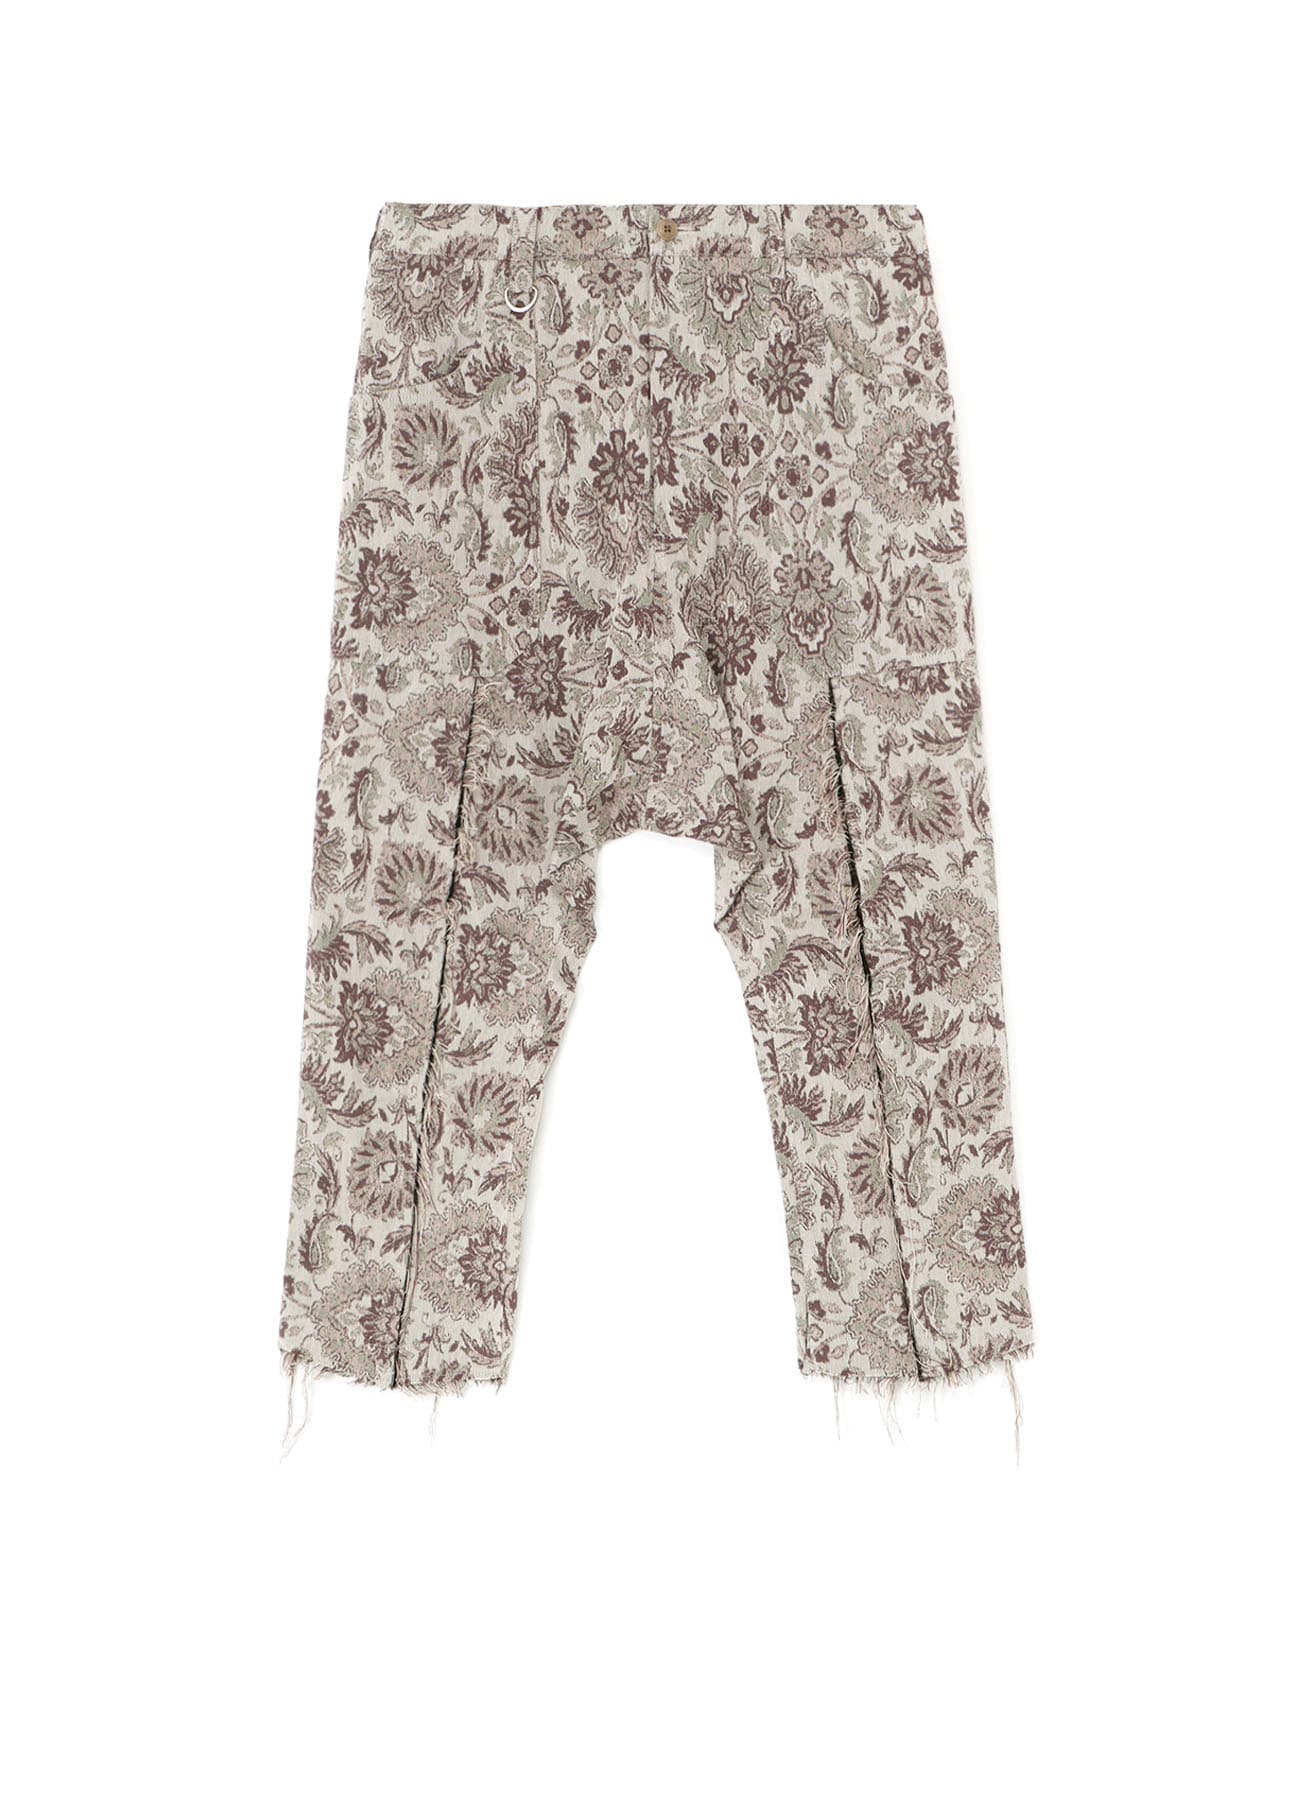 GOBELIN-STYLE JACQUARD GRAFTED SAROUEL PANTS WITH CUT-OFF HEM